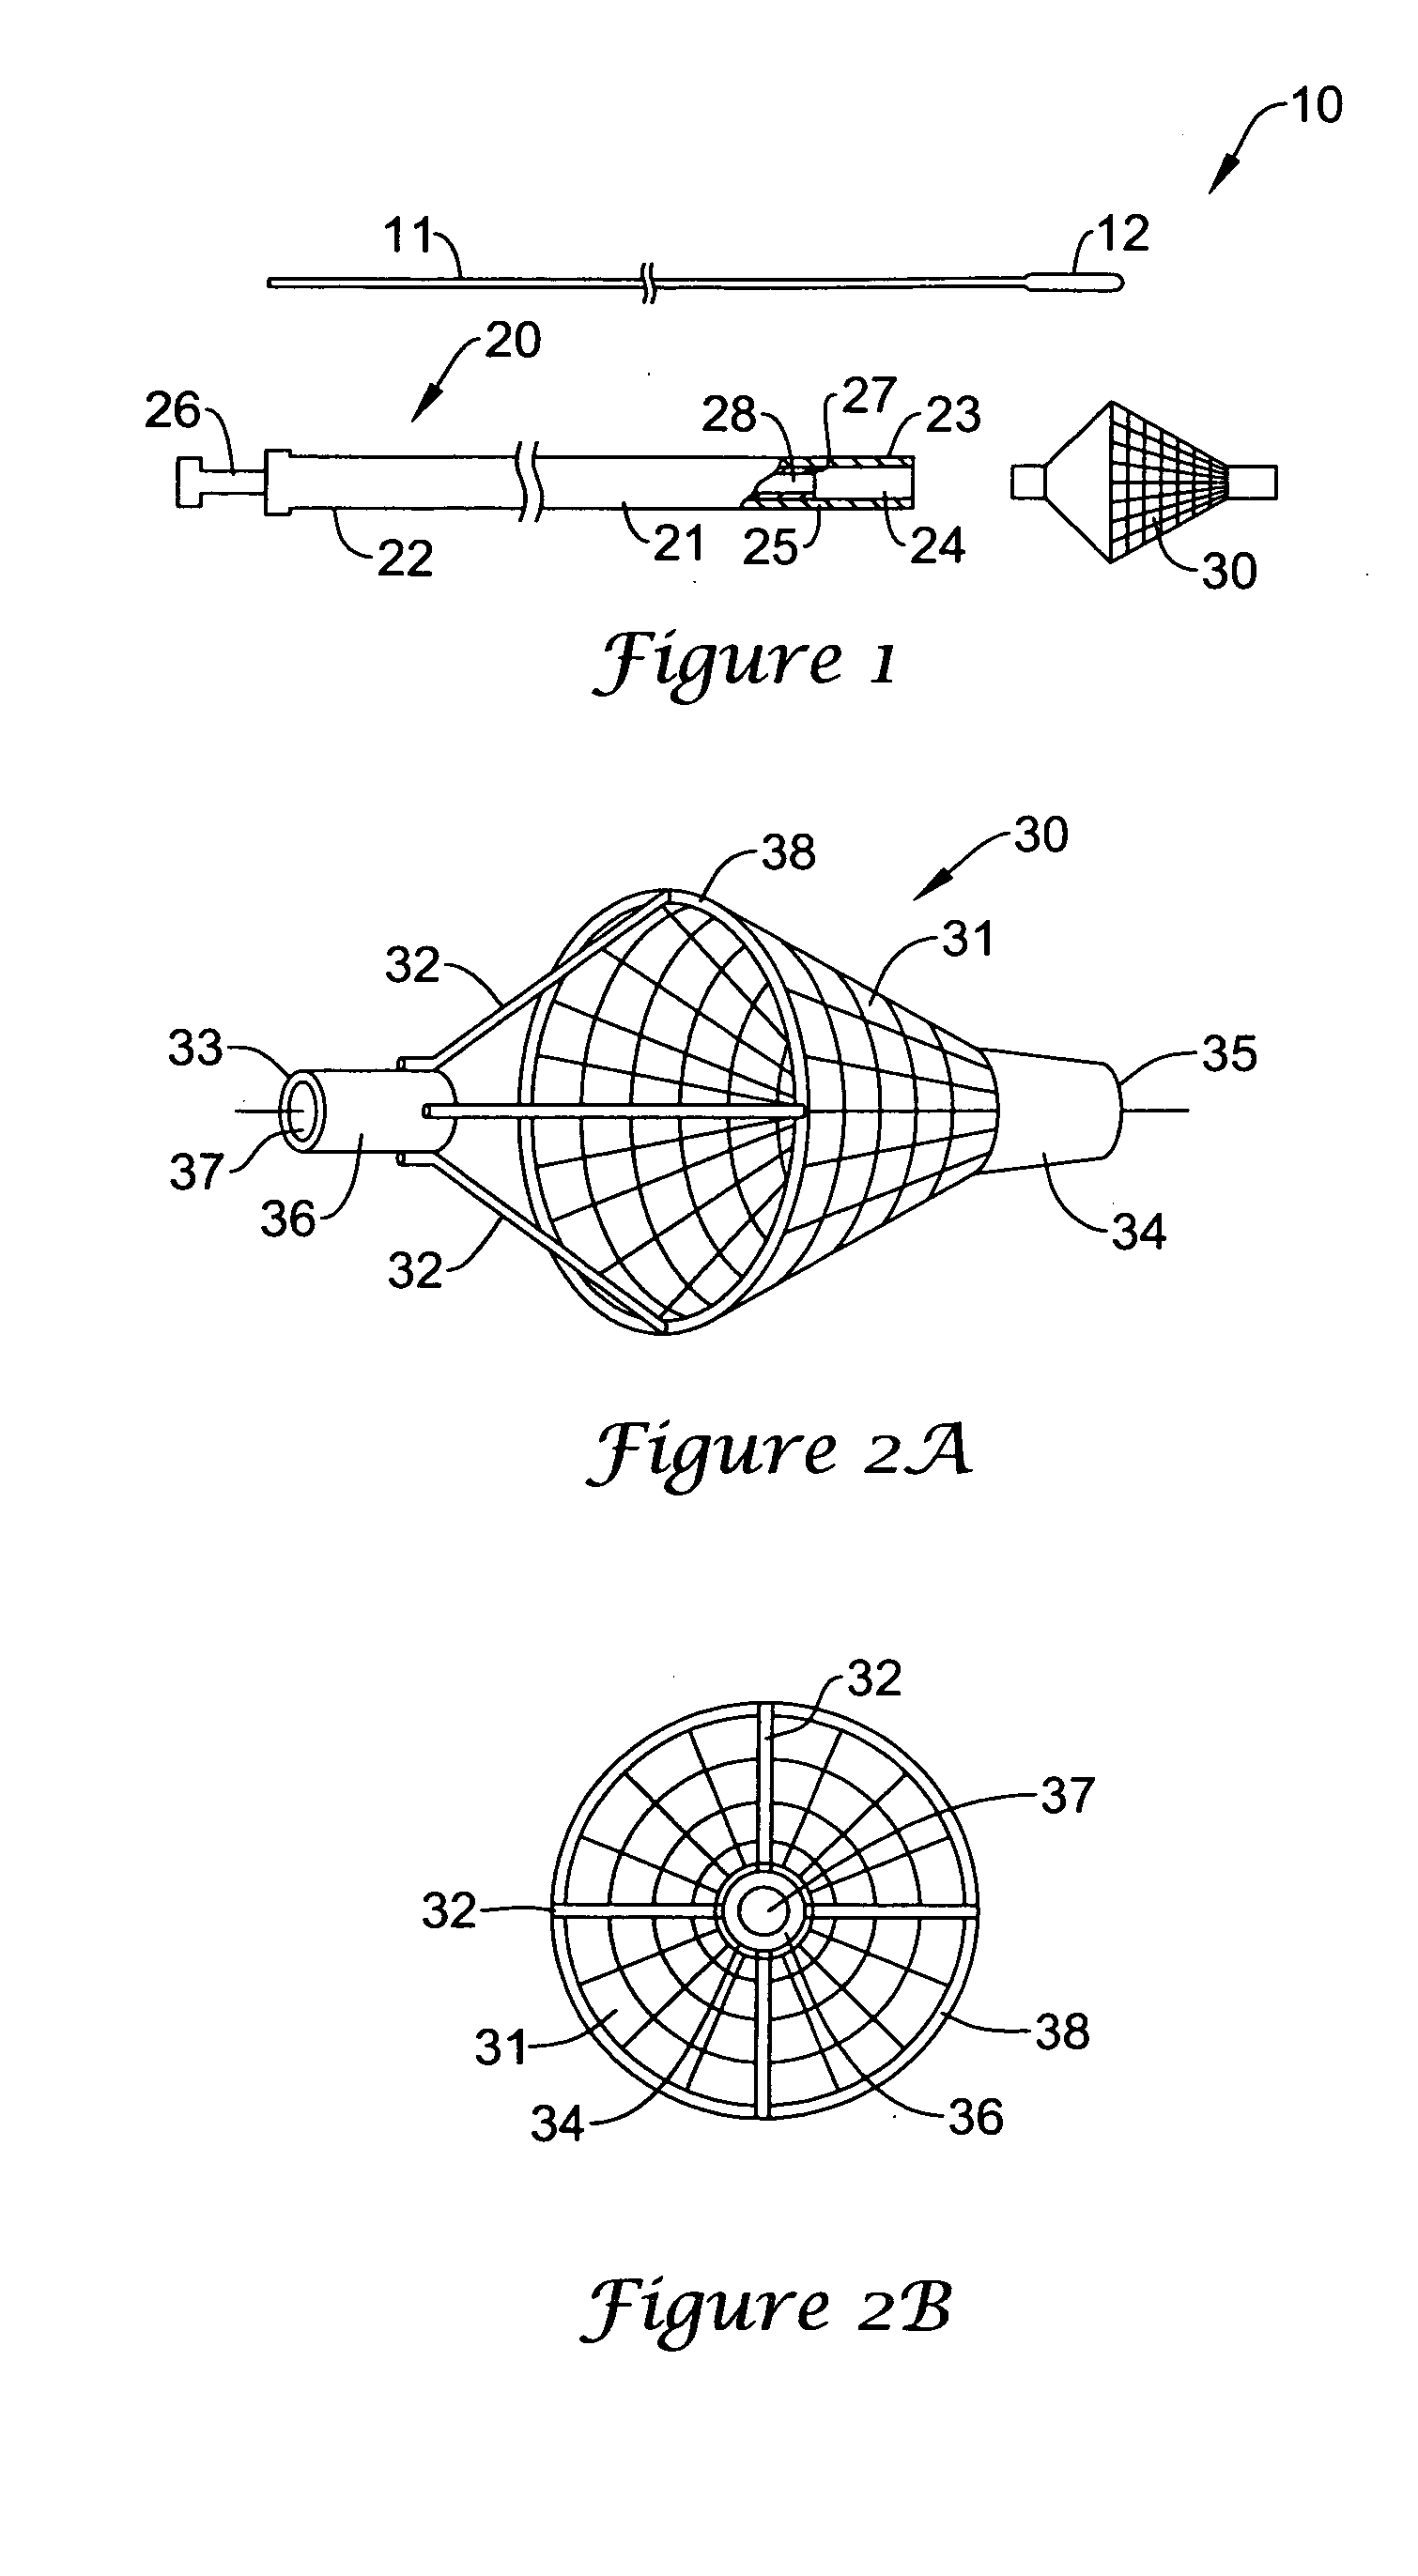 Emboli filtration system and methods of use